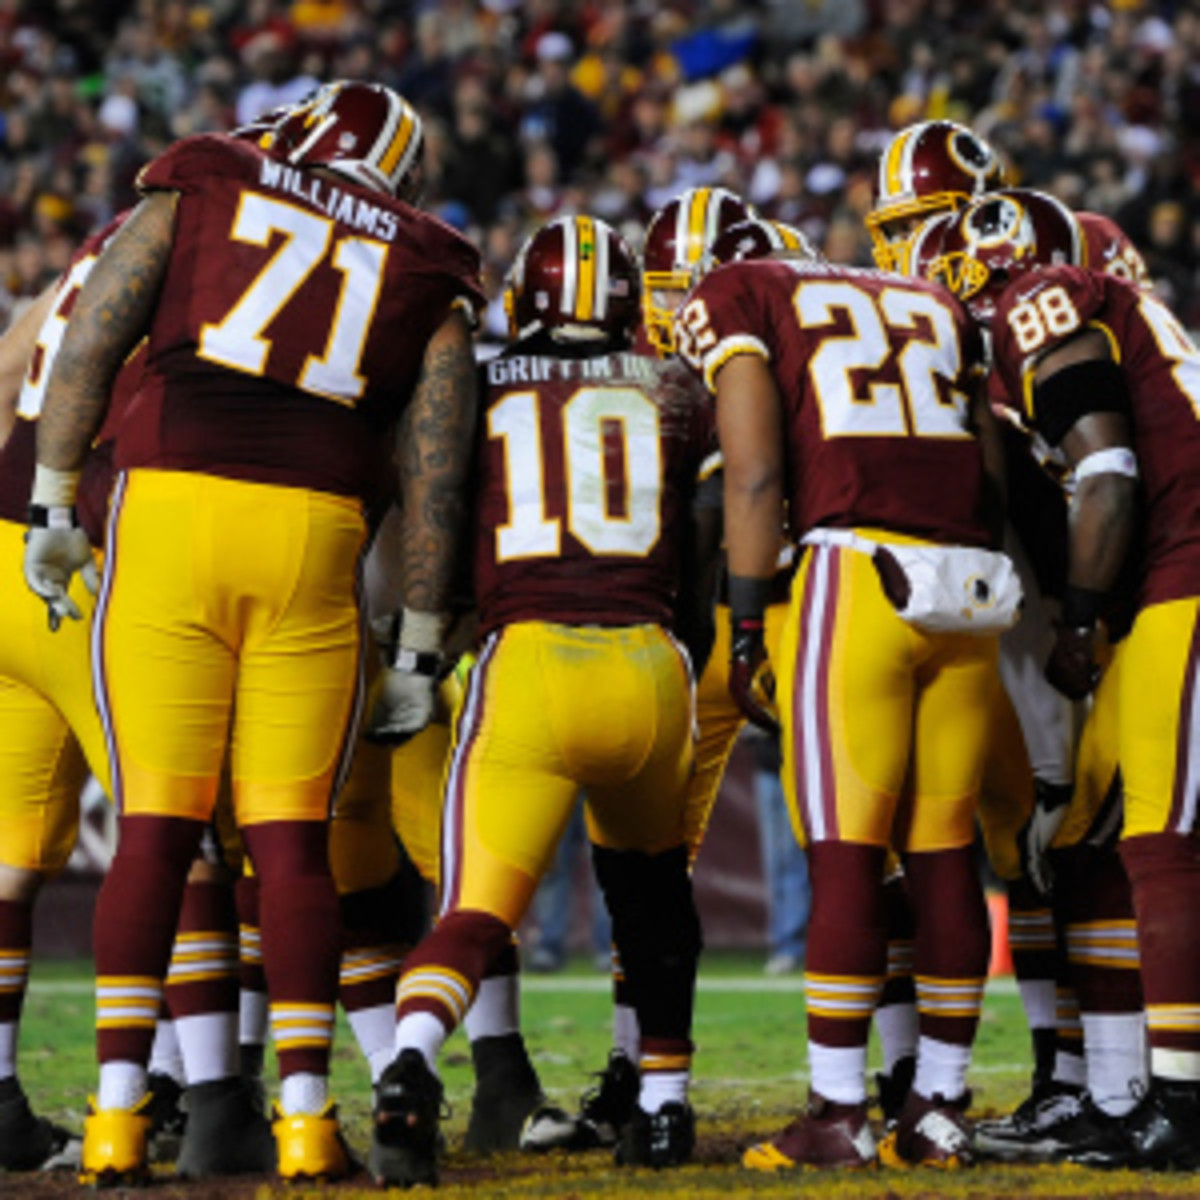 Four unidentified players from the Washington Redskins had been having conversations with a fictitious online identity. (Patrick McDermott/Getty Images)